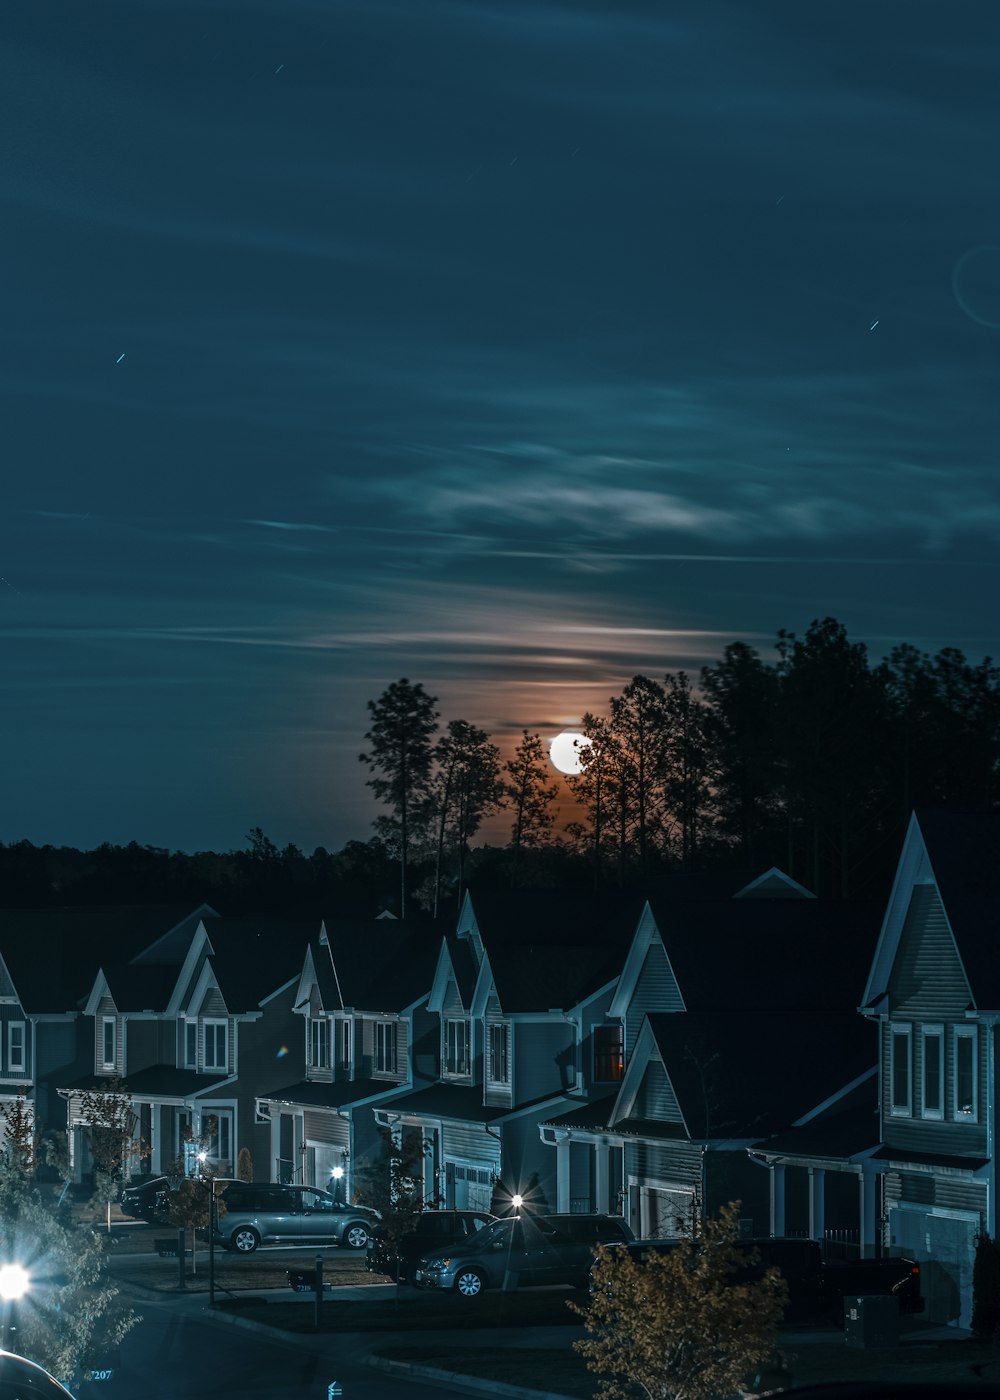 green and white houses during night time